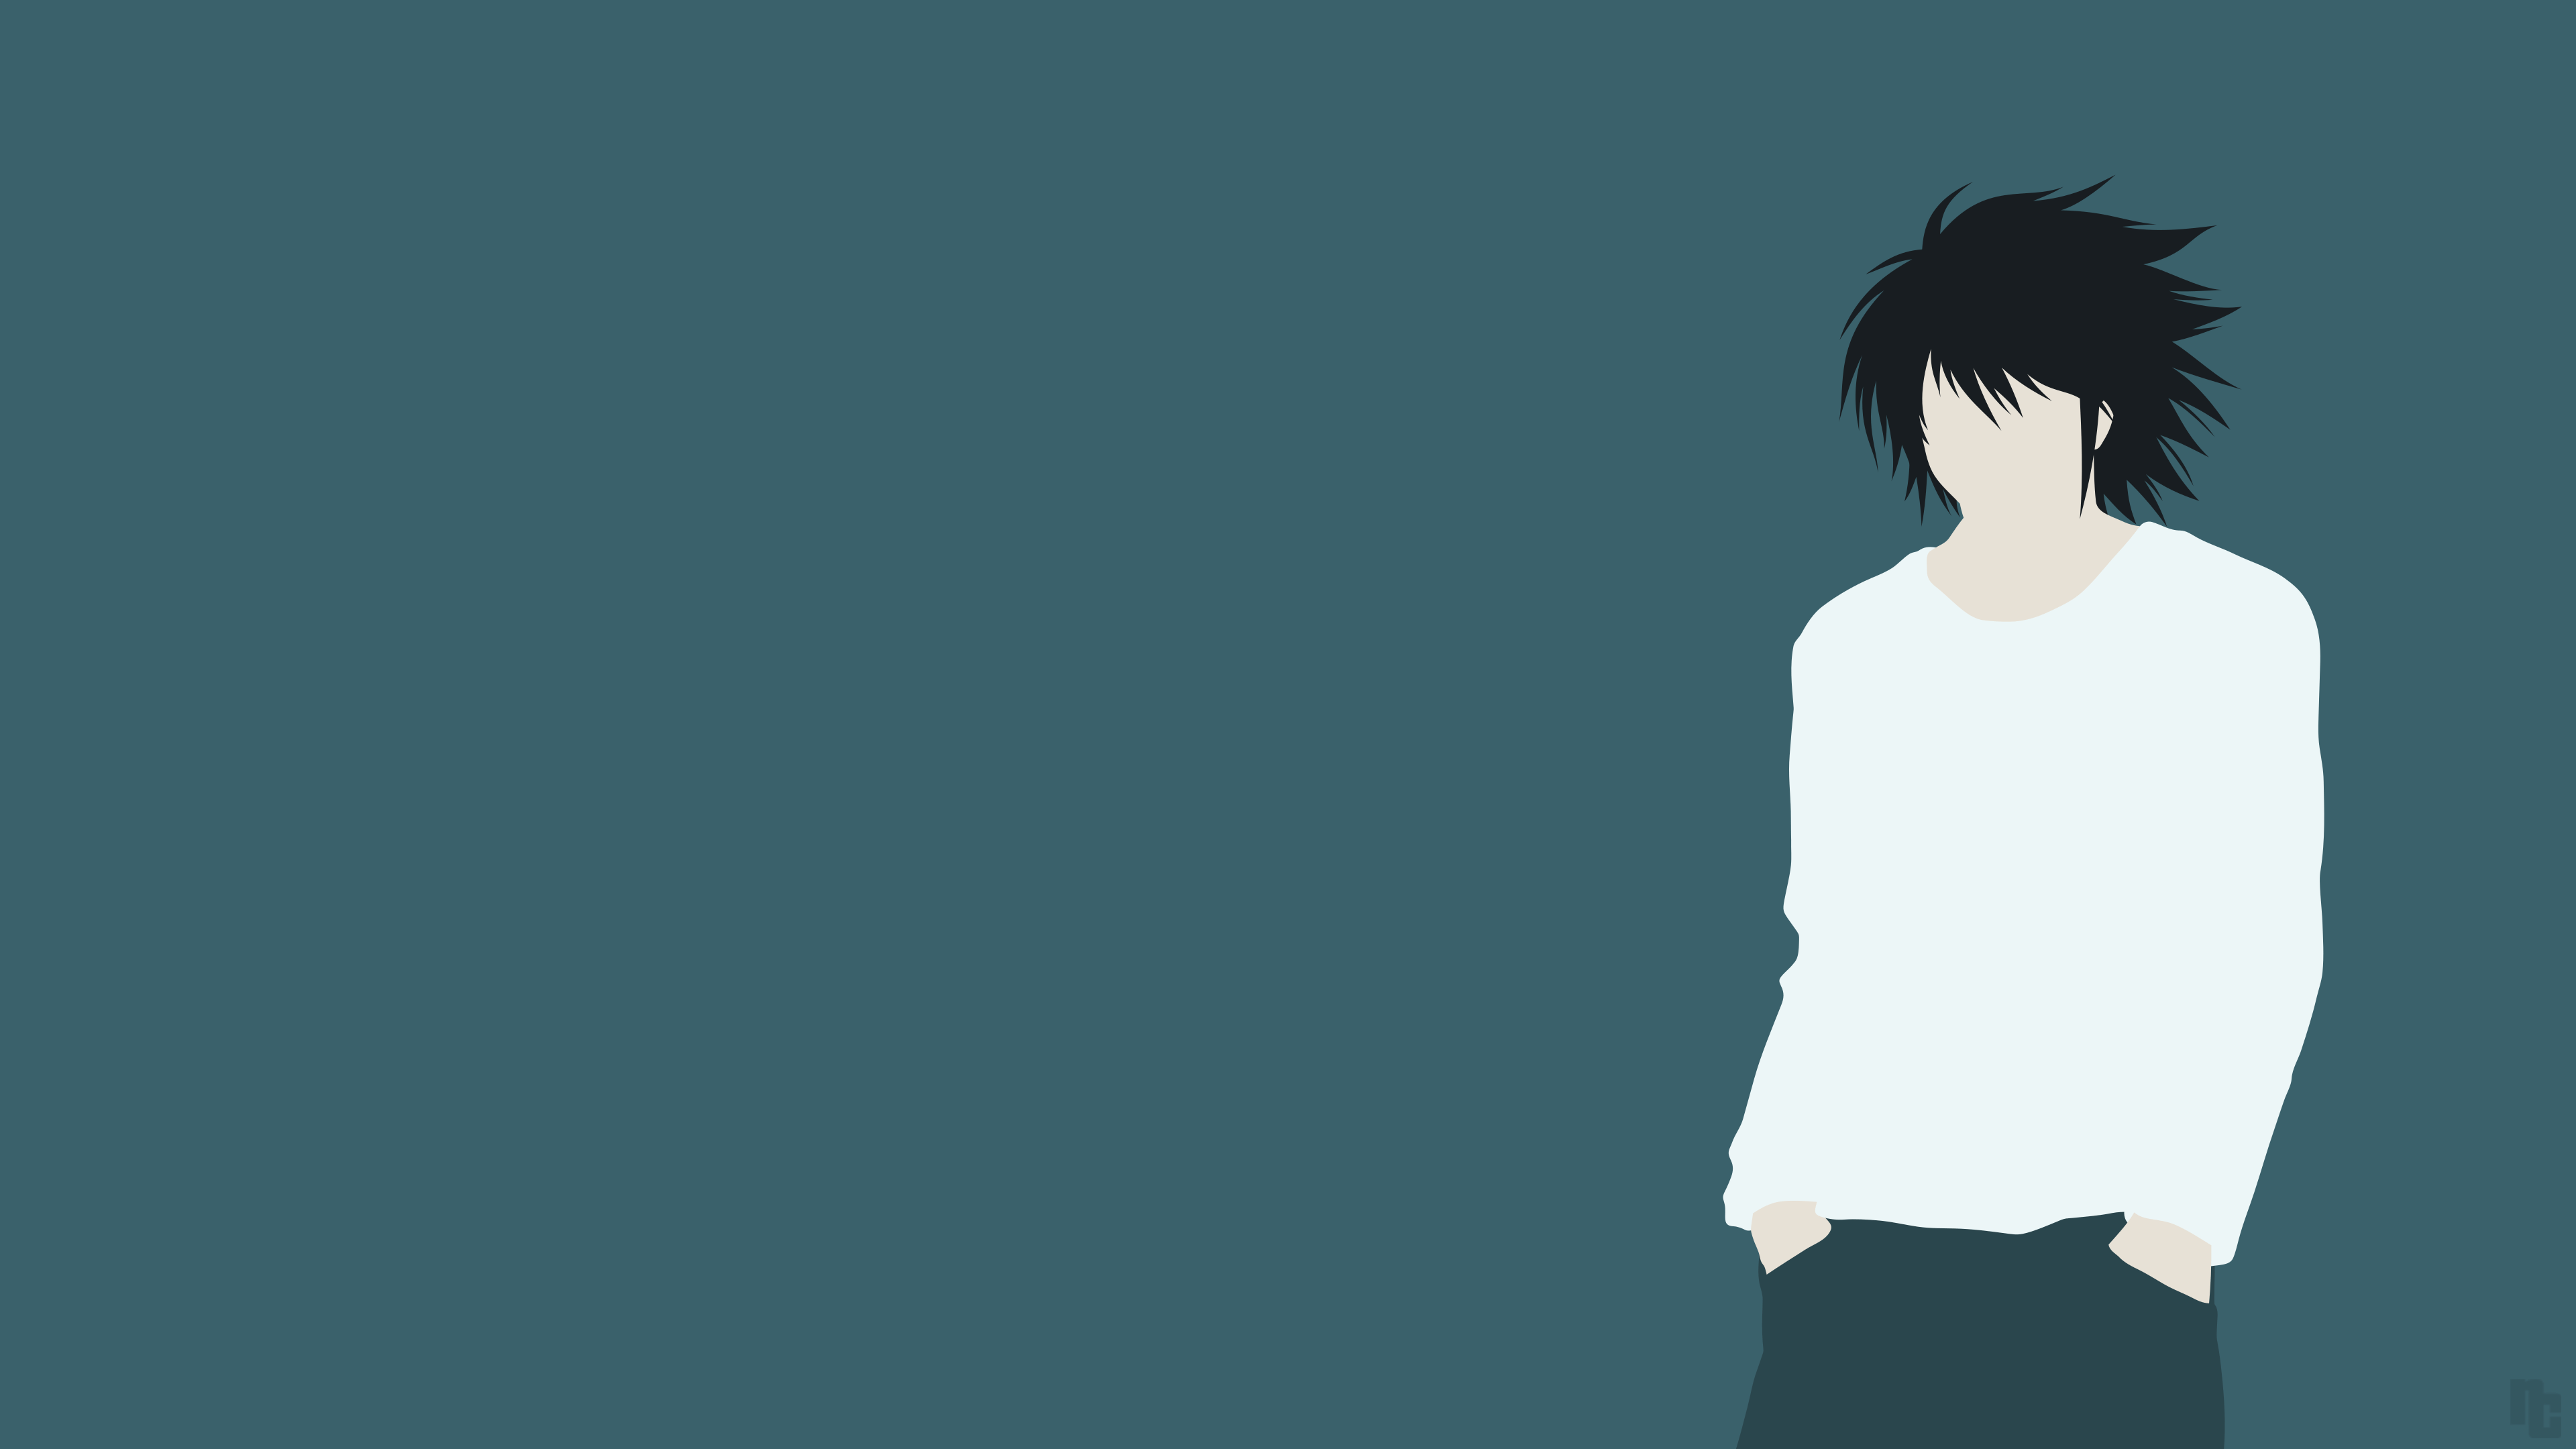 Death Note Minimalist Wallpapers Top Free Death Note Minimalist Backgrounds Wallpaperaccess We have a massive amount of hd images that will make your computer or smartphone. death note minimalist wallpapers top